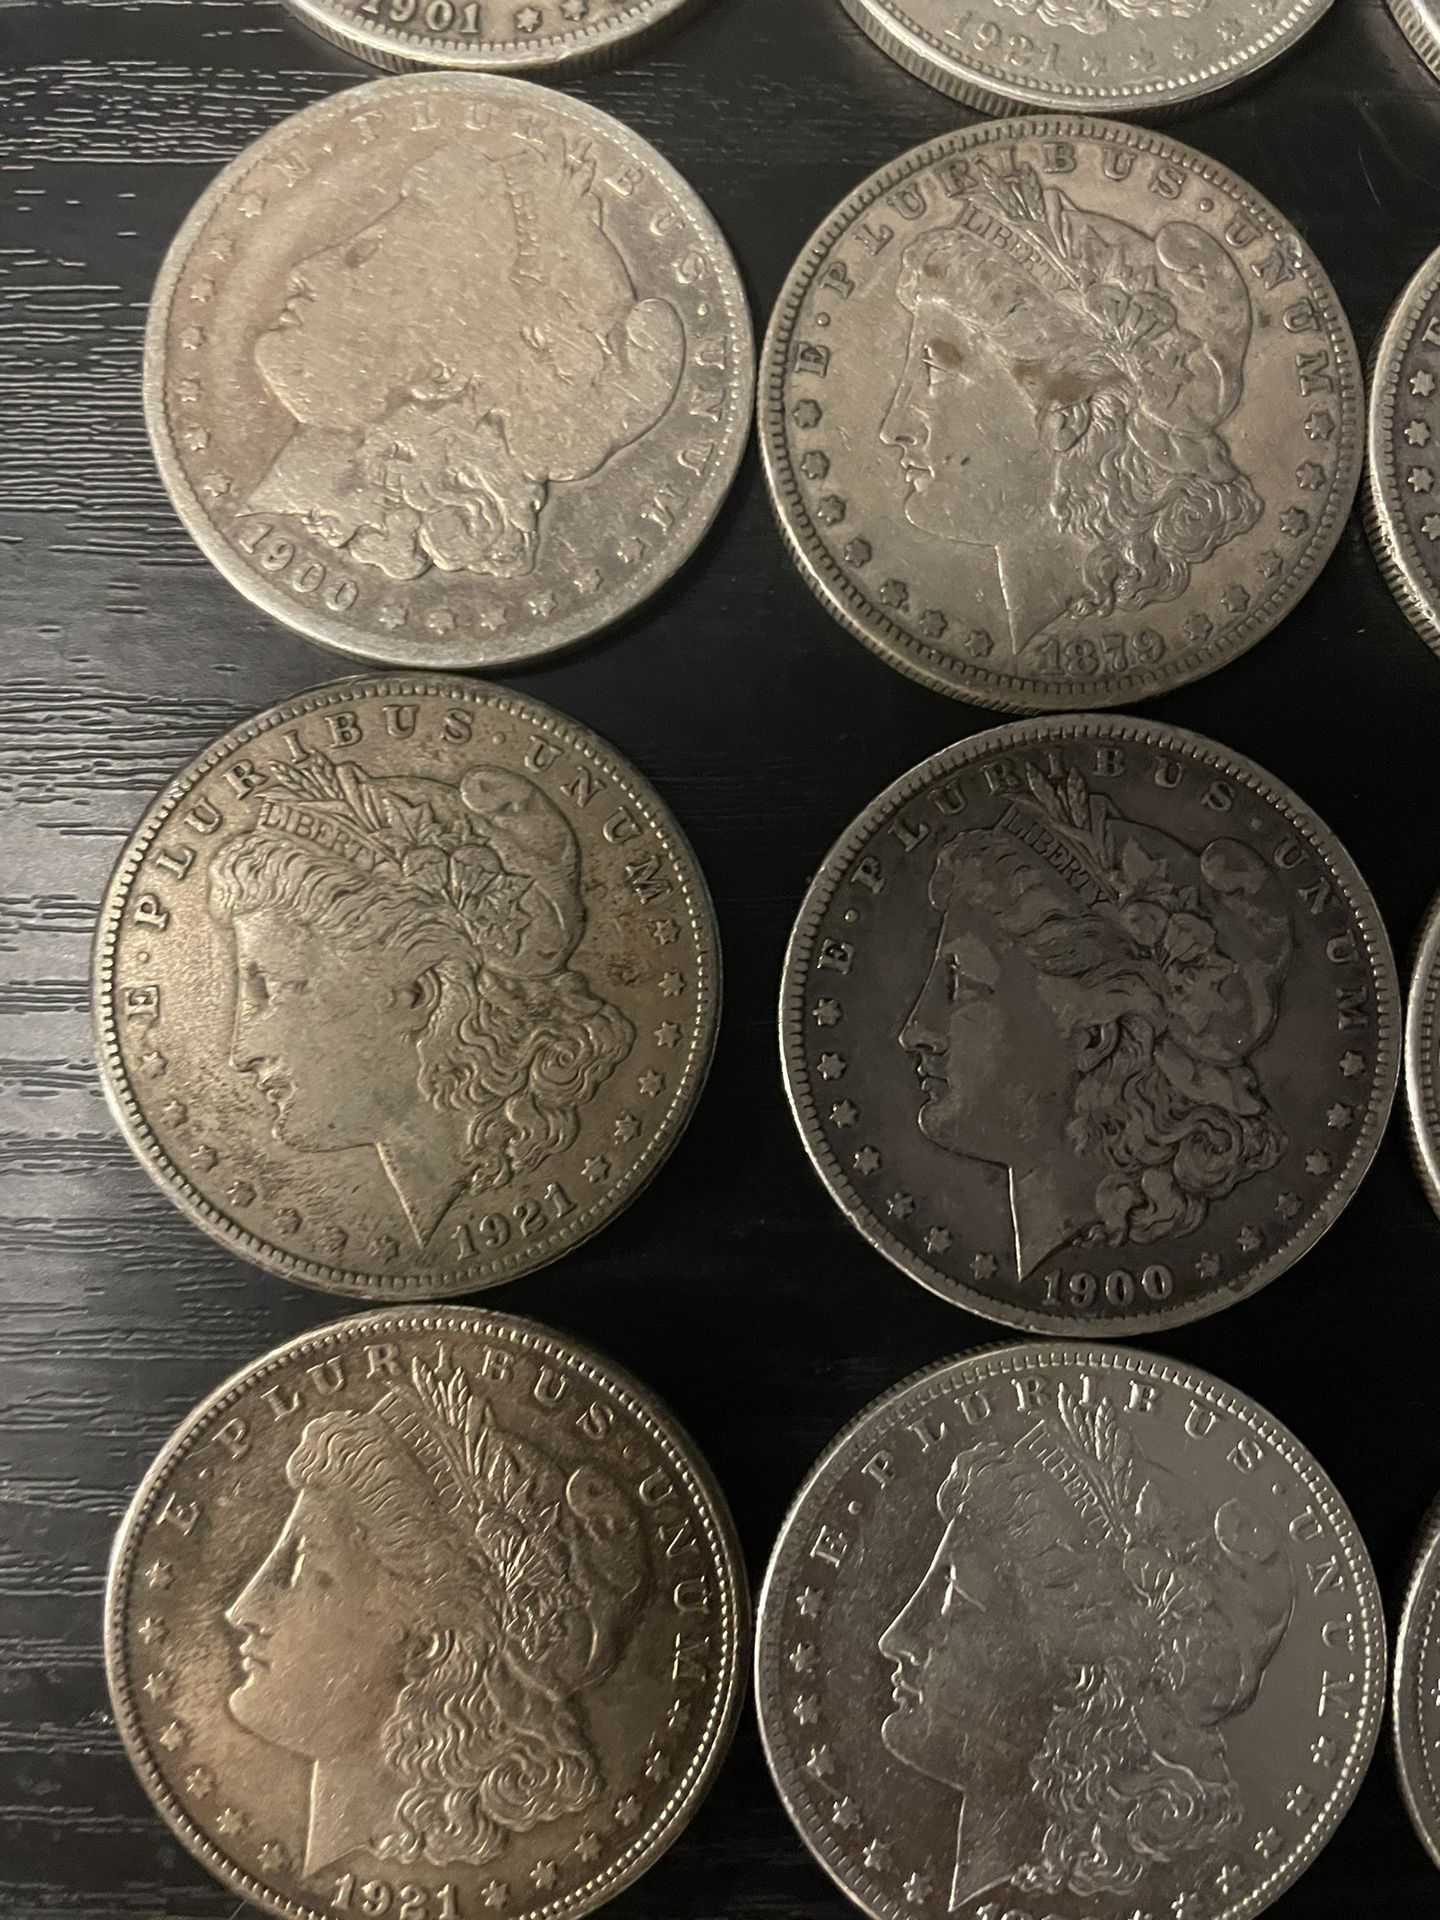 Lot And of 29 Morgan's Various Years, Mins and Condition A